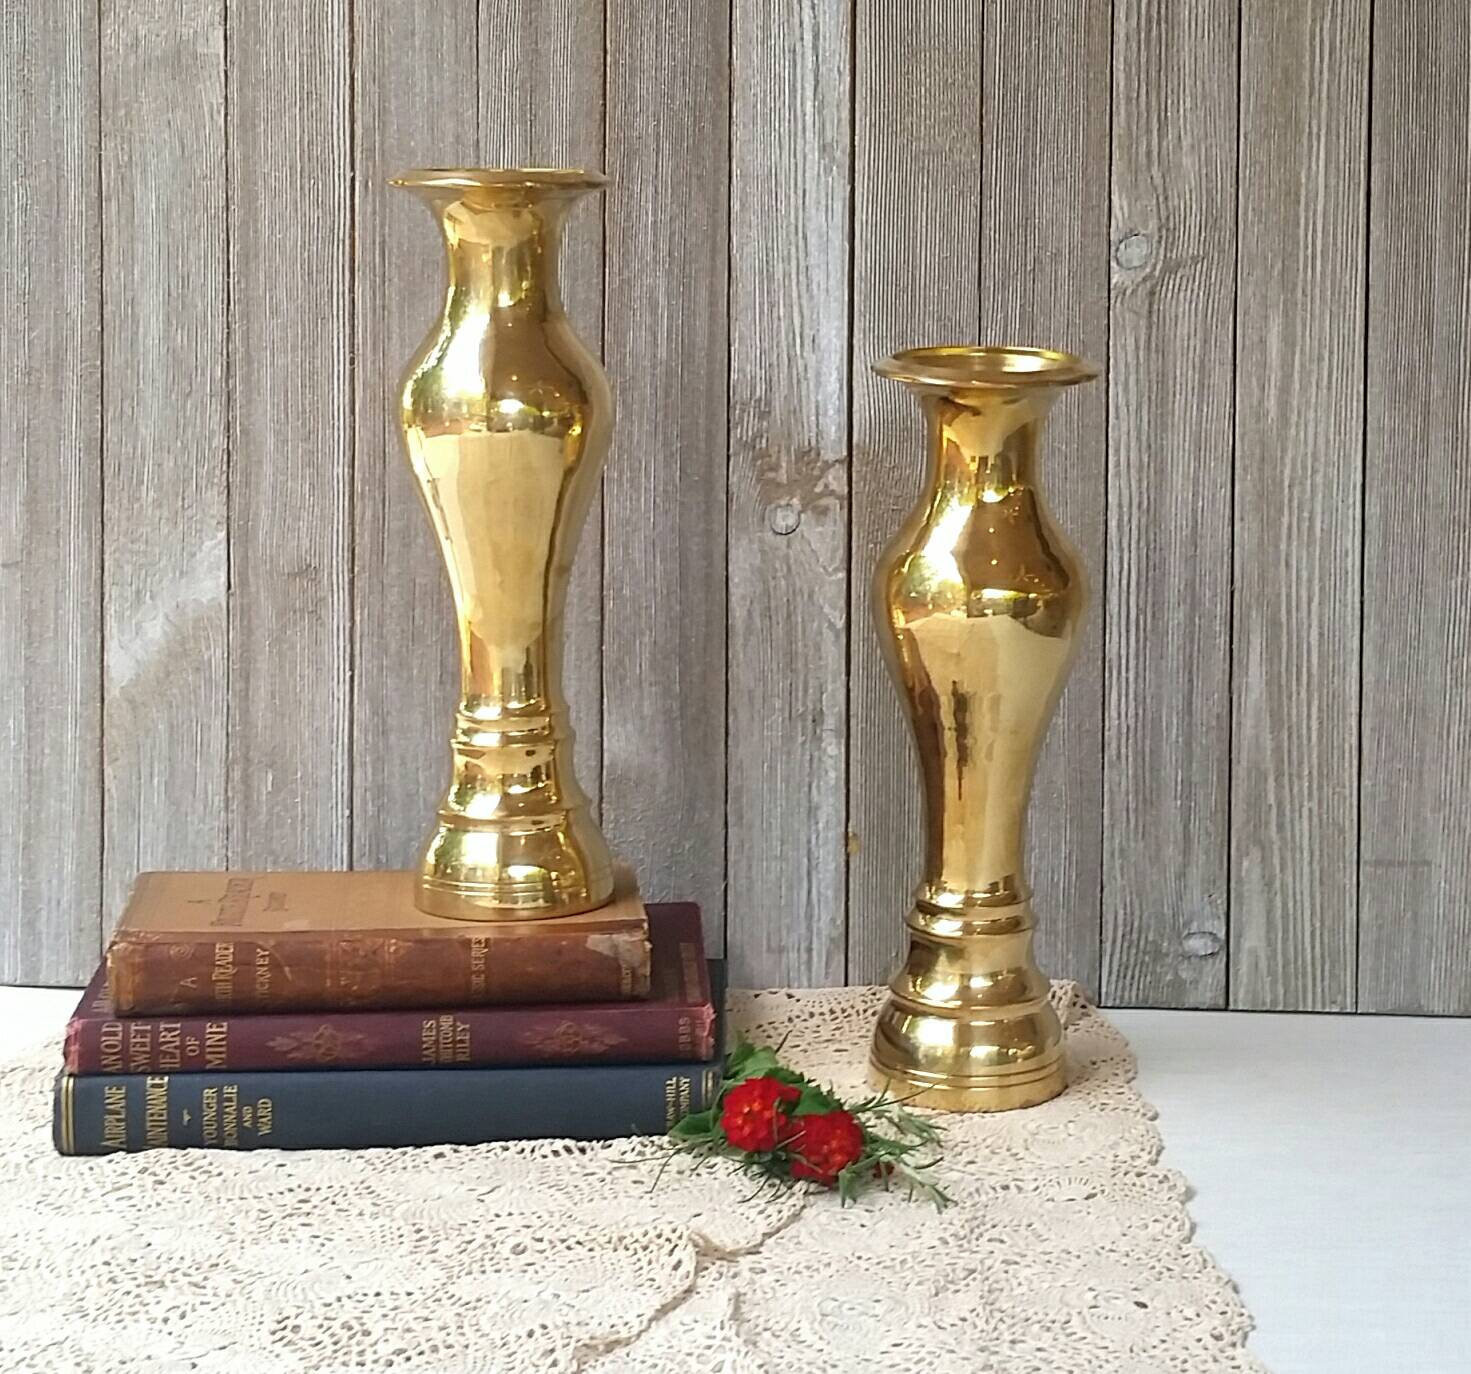 20 Cute Antique Brass Vase Made In India 2023 free download antique brass vase made in india of 2 large vintage brass vases heavy brass bud vases 11 etsy intended for dc29fc294c28ezoom